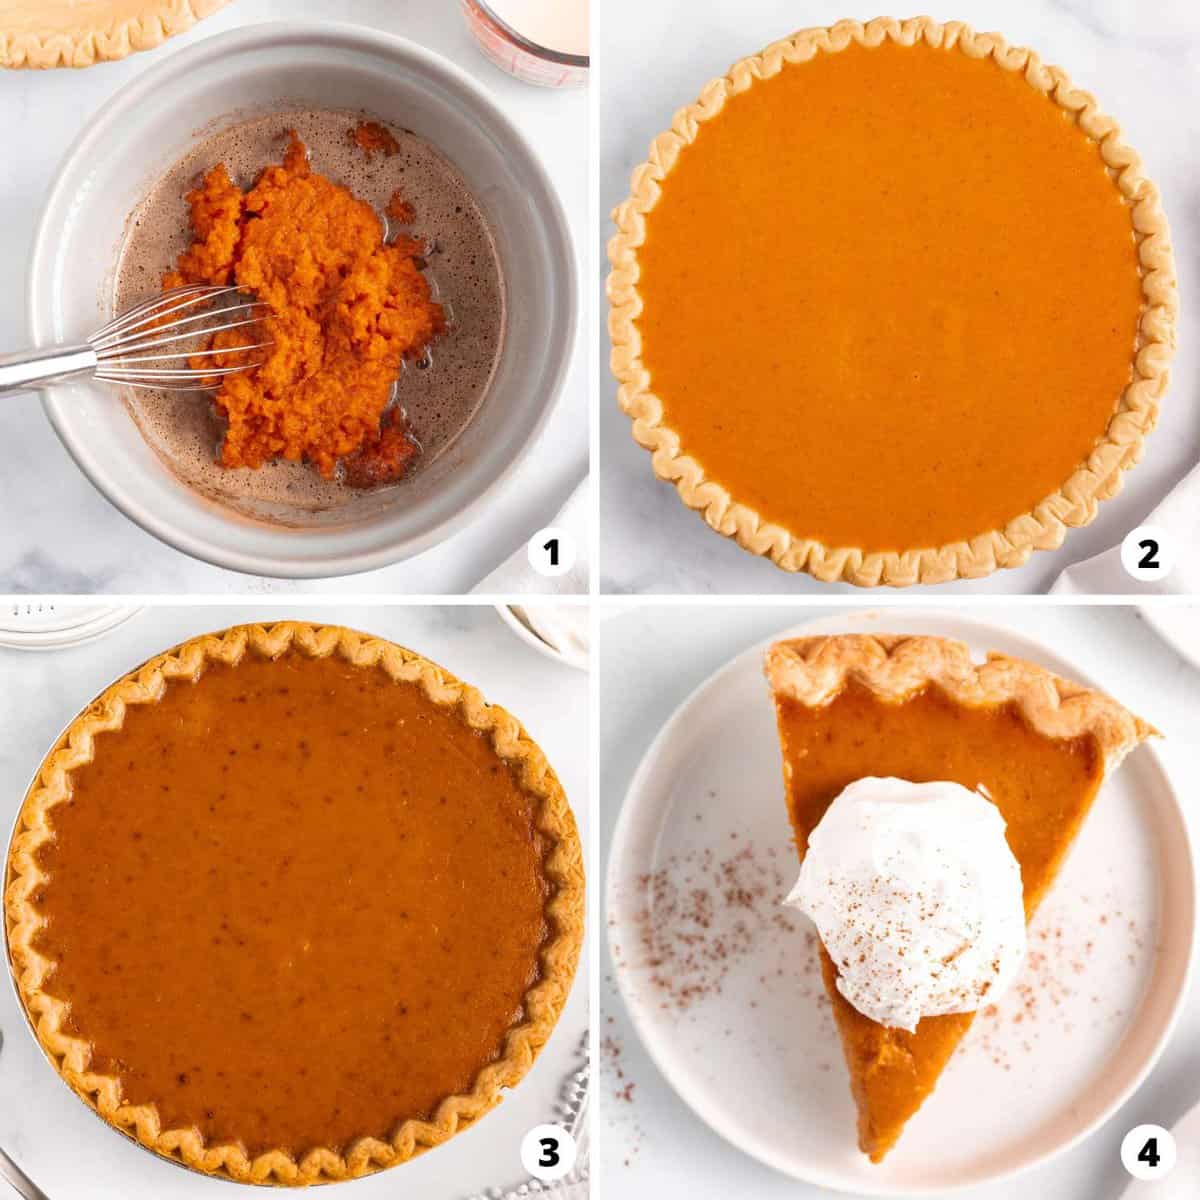 Showing how to make pumpkin pie in a 4 step collage.